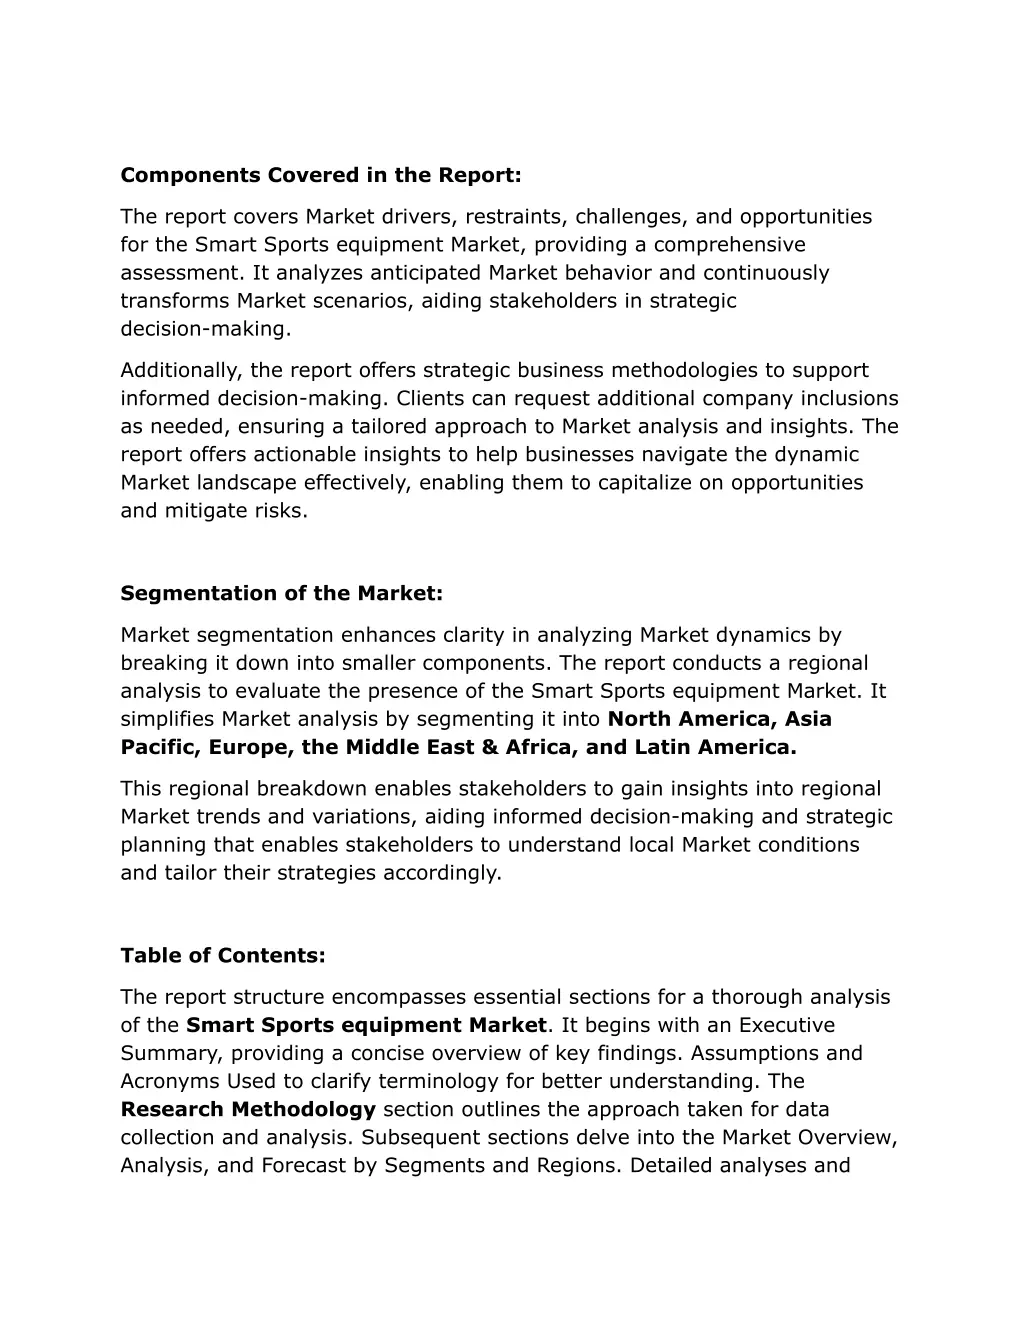 components covered in the report